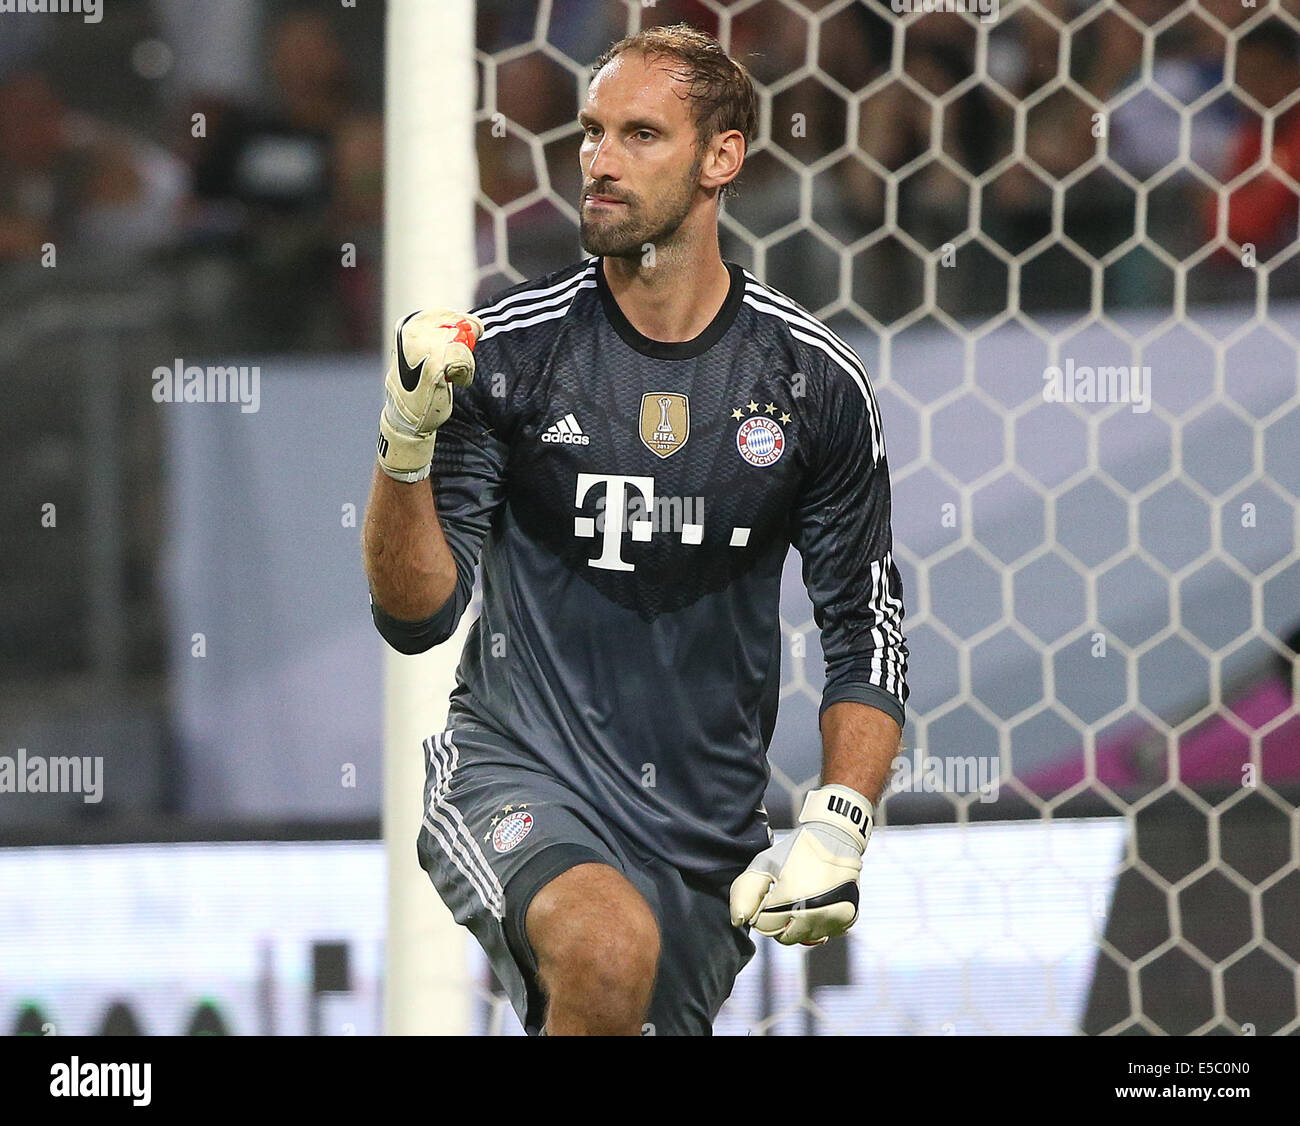 Hamburg, Germany. 26th July, 2014. Munich's goal keeper Tom Starke reacts during the Telekom Cup soccer match between FC Bayern Munich and Borussia Moenchengladbach in the Imtech Arena in Hamburg, Germany, 26 July 2014. Photo: Axel Heimken/dpa/Alamy Live News Stock Photo